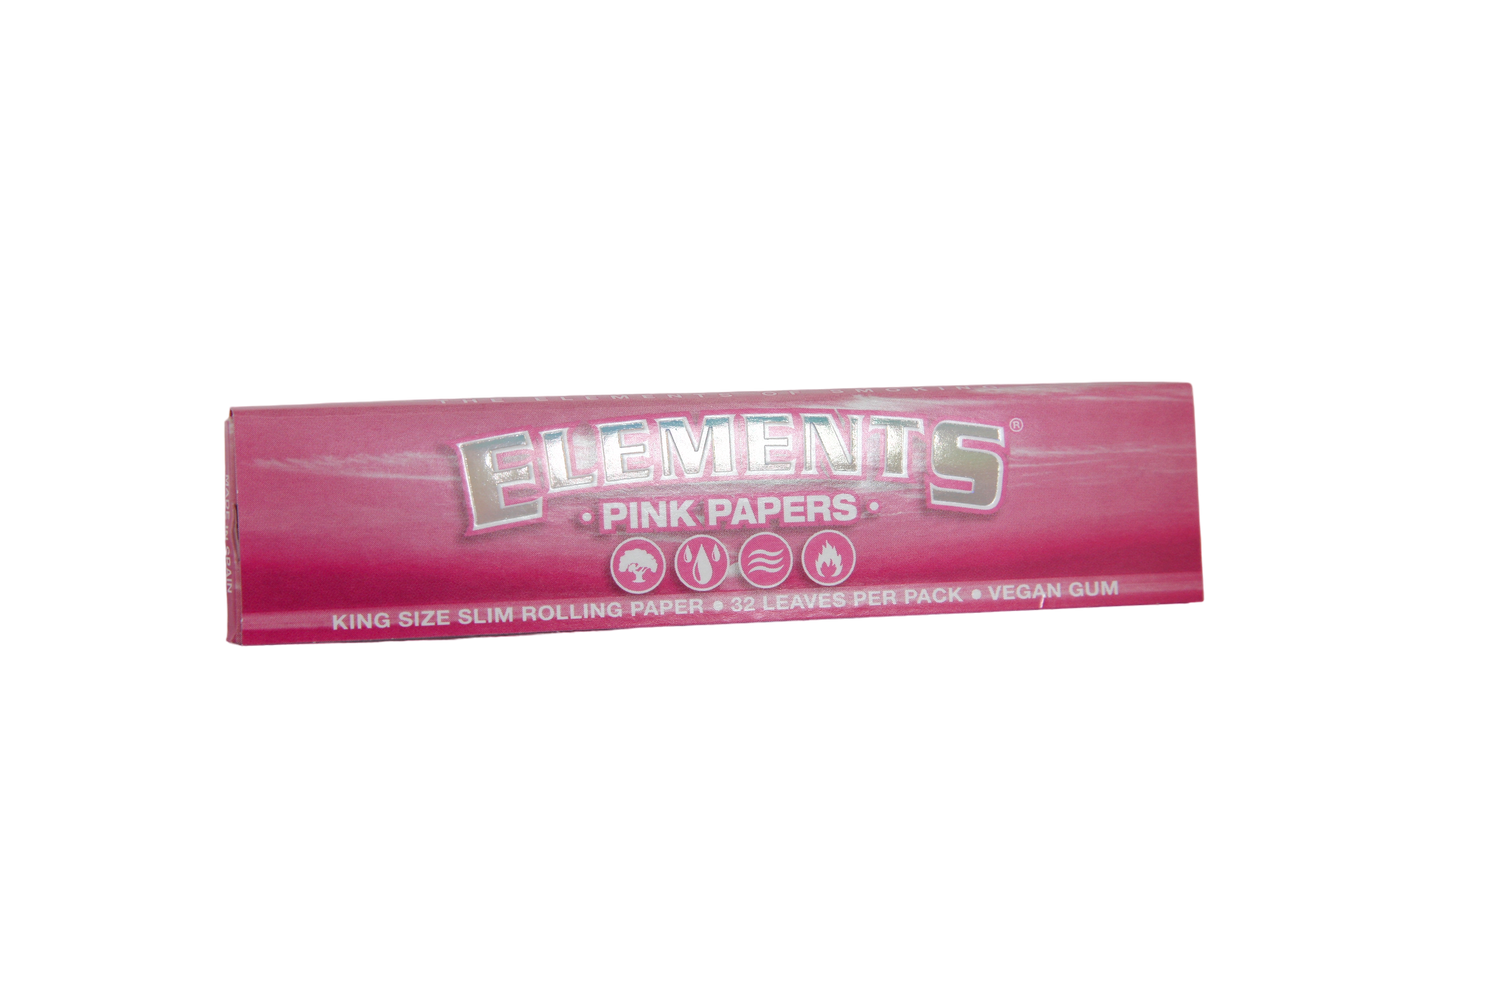 Elements Pink Papers - King Size